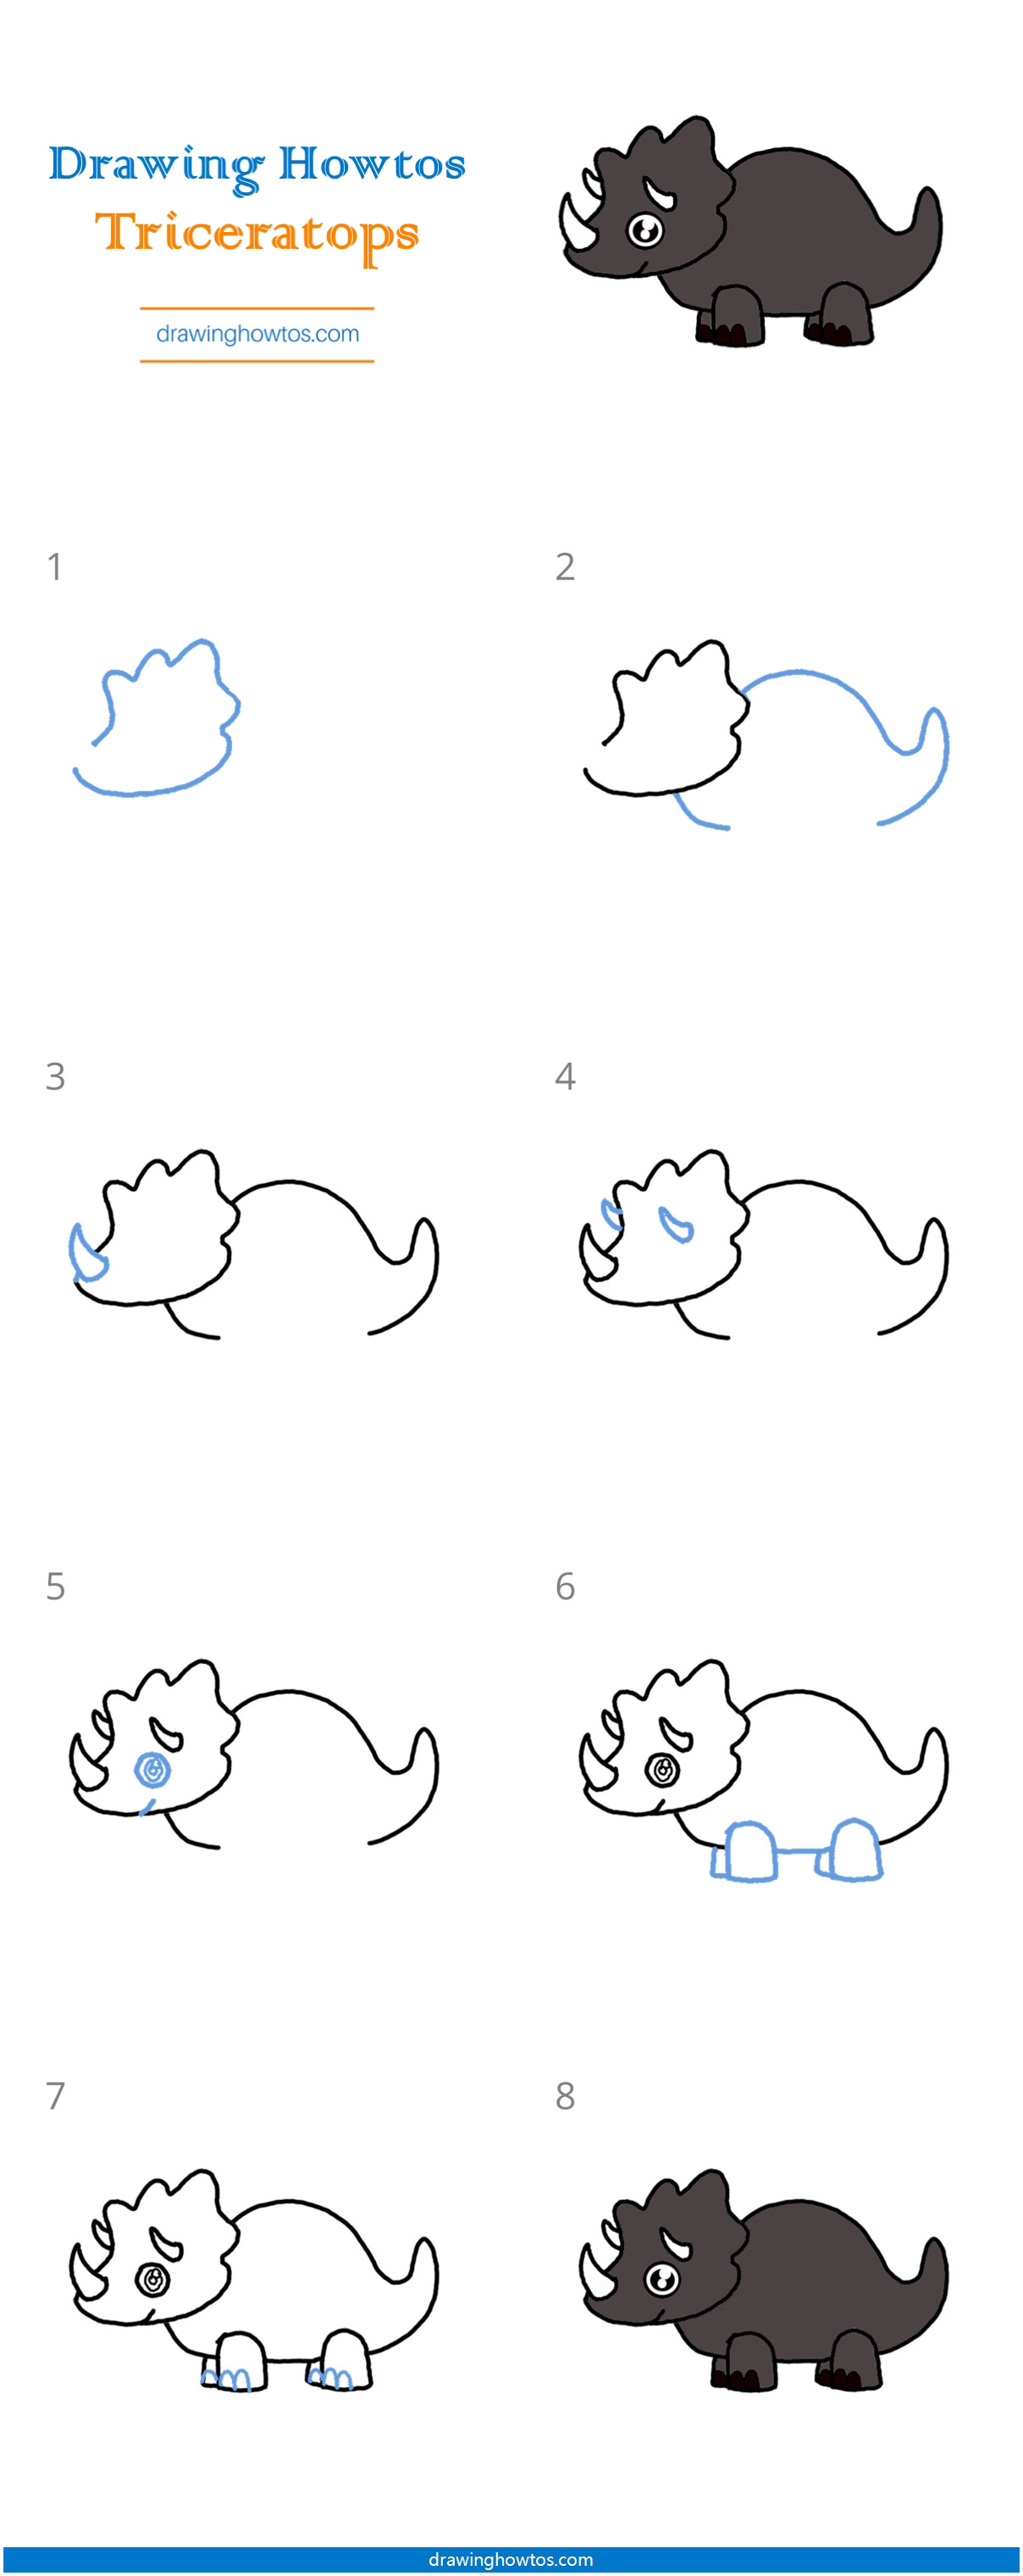 How to Draw a Triceratops - Step by Step Easy Drawing Guides - Drawing